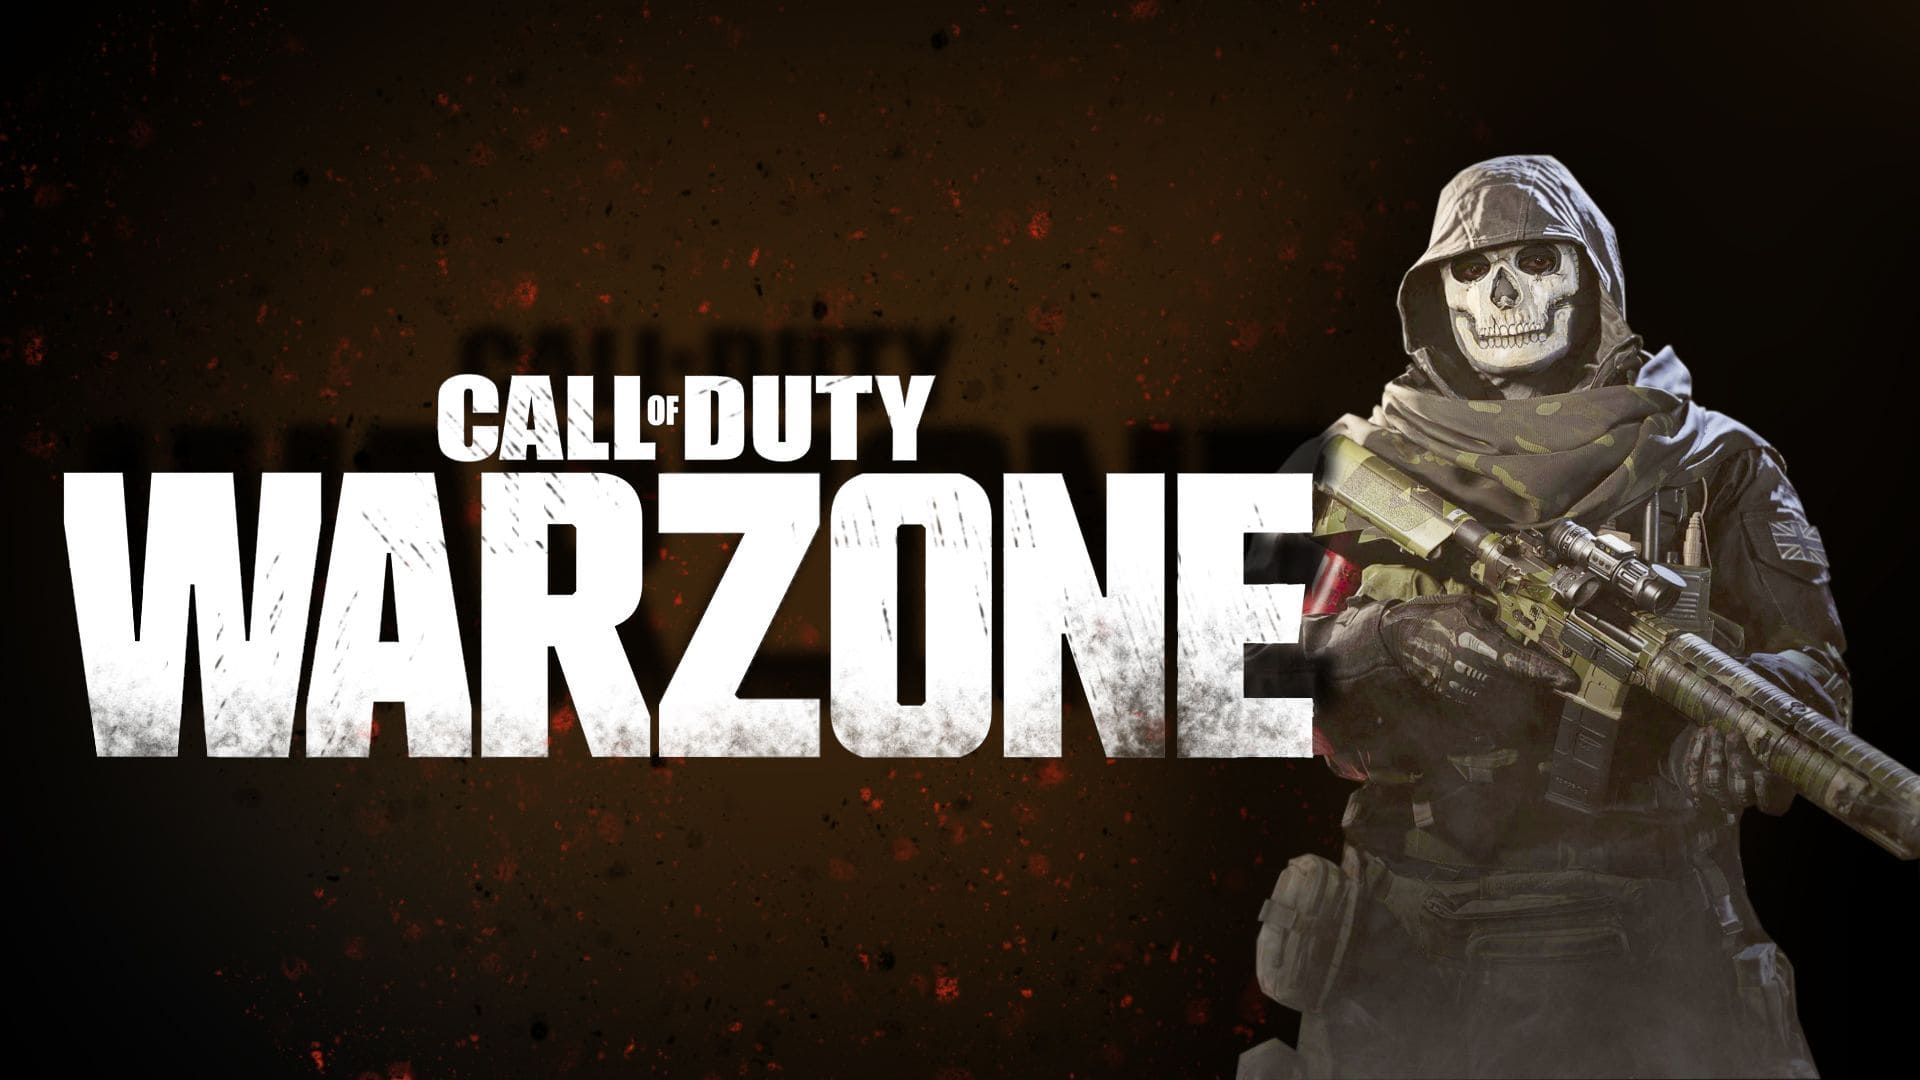 Call of Duty: Warzone Wallpaper, Top Free Call of Duty: Warzone Background, Picture & Image Download